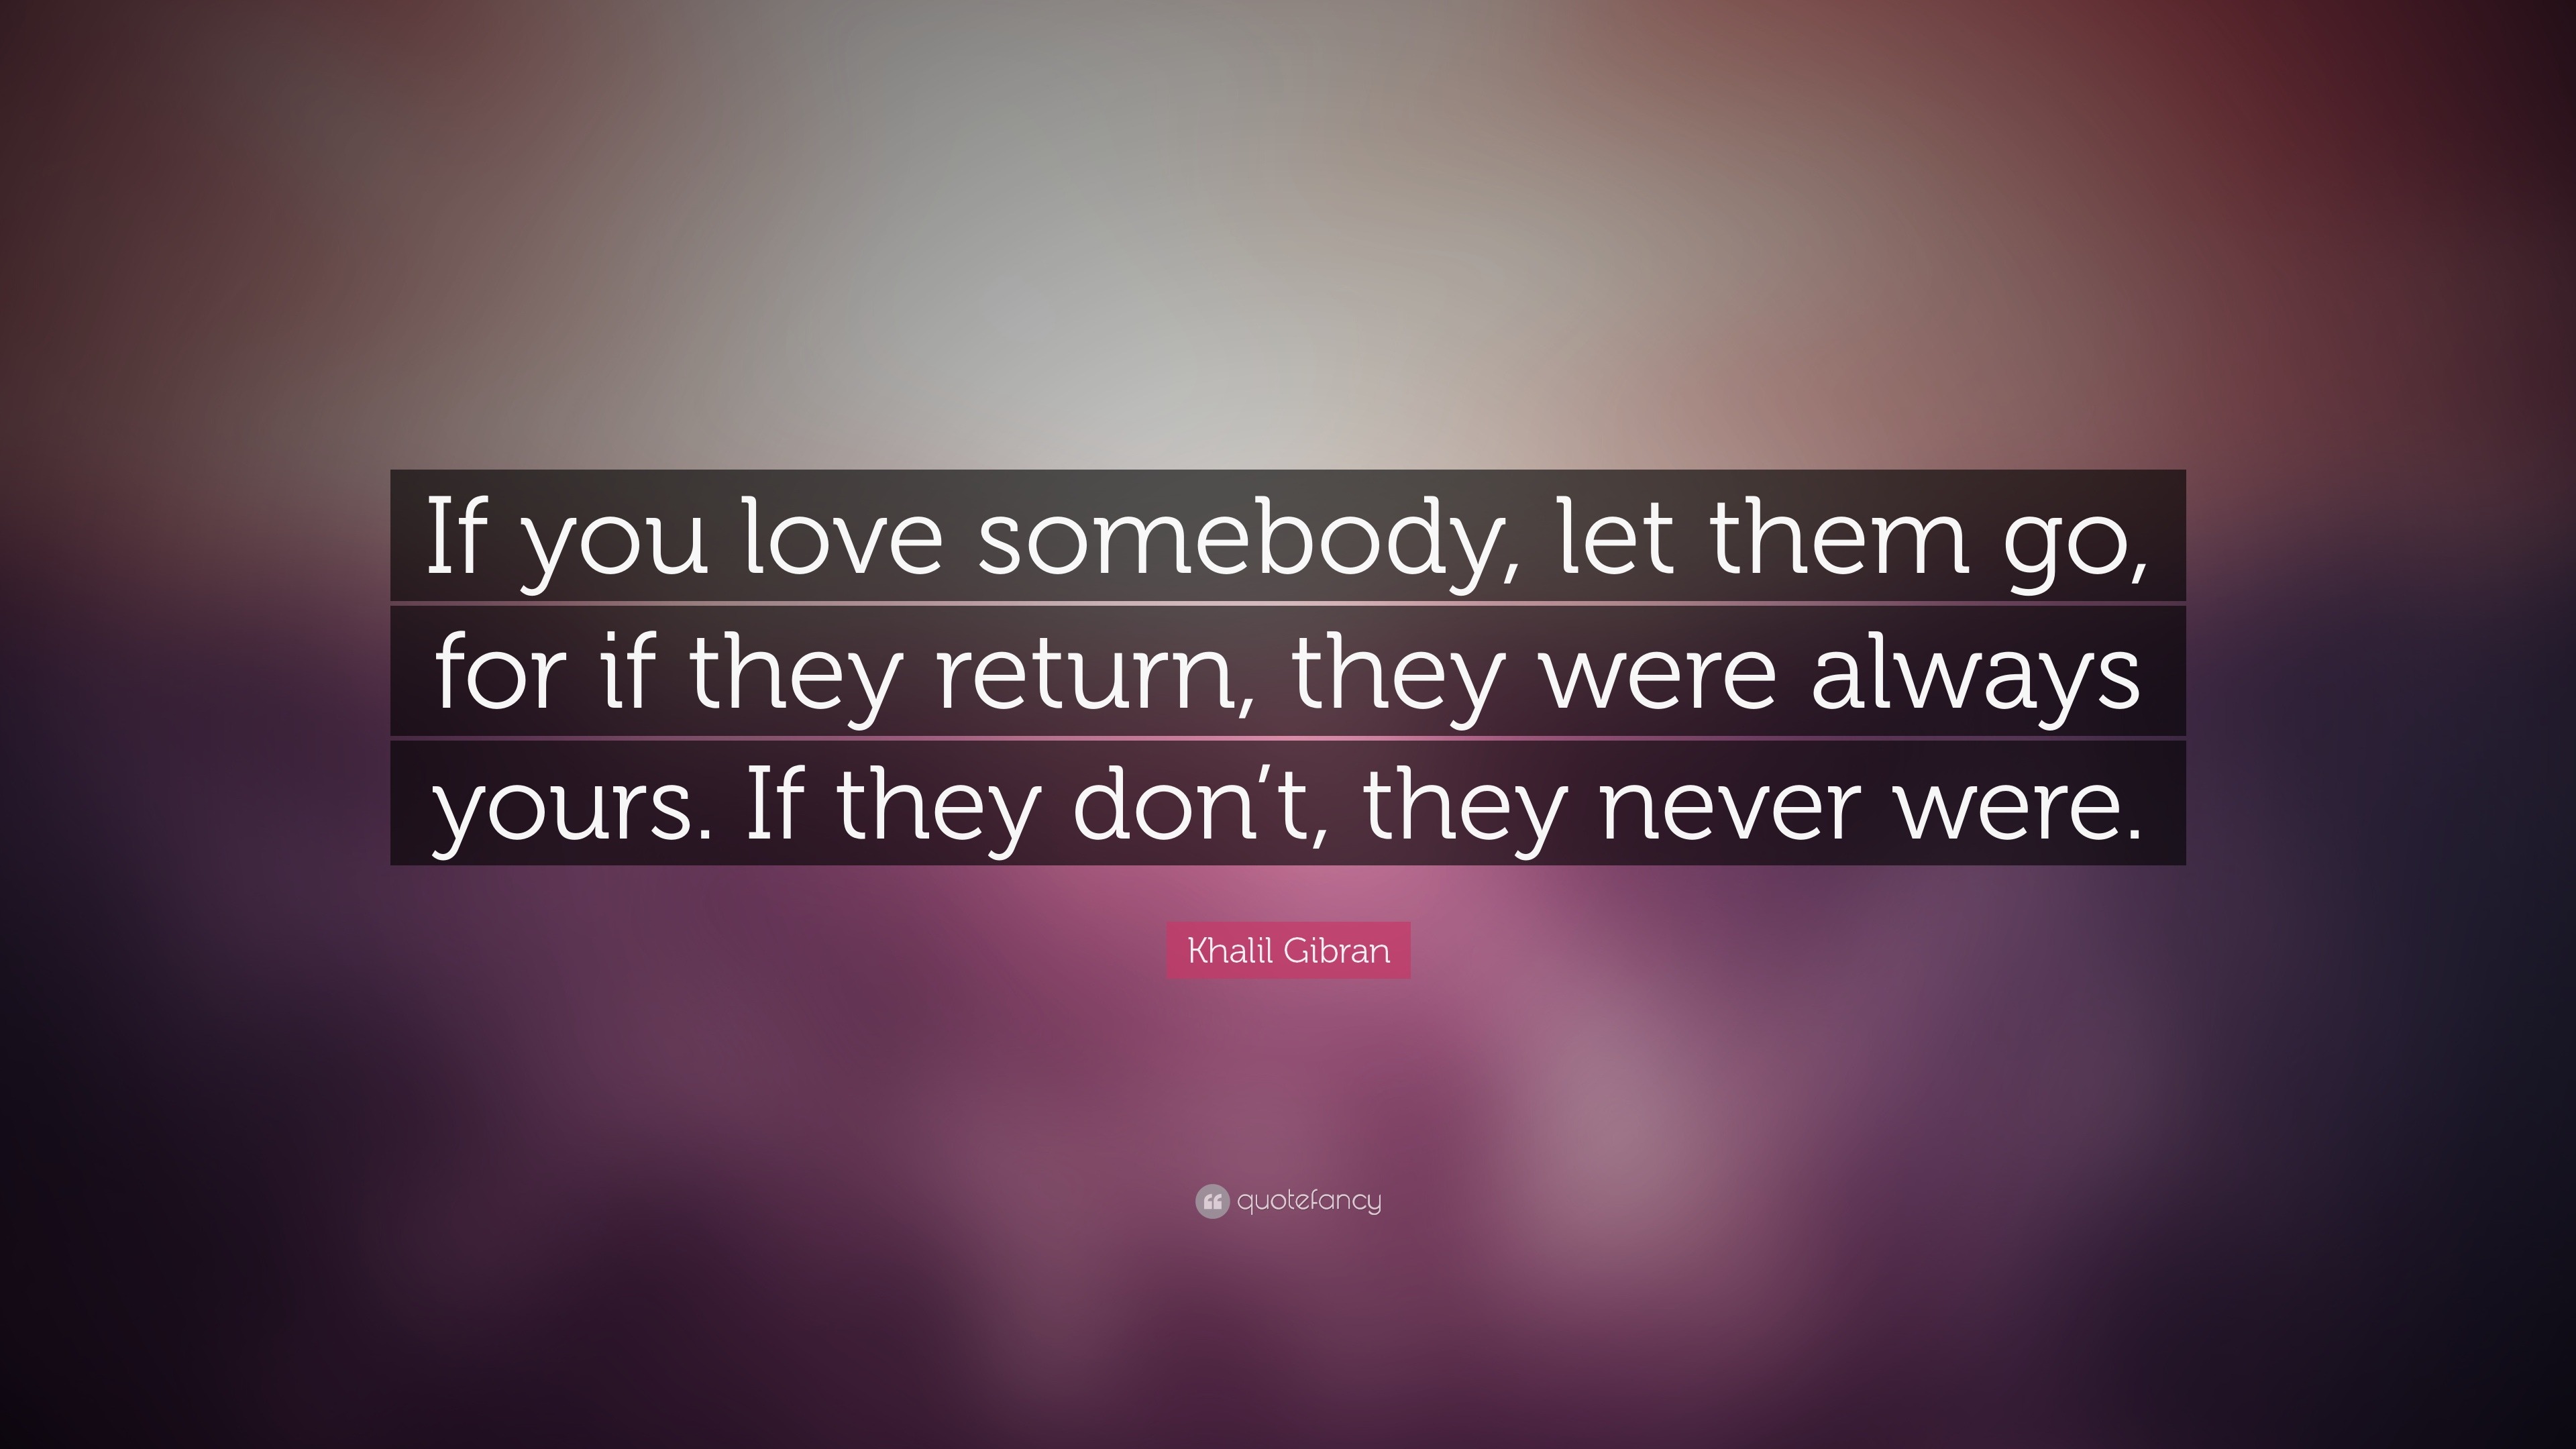 Khalil Gibran Quote If you love somebody let them go for if